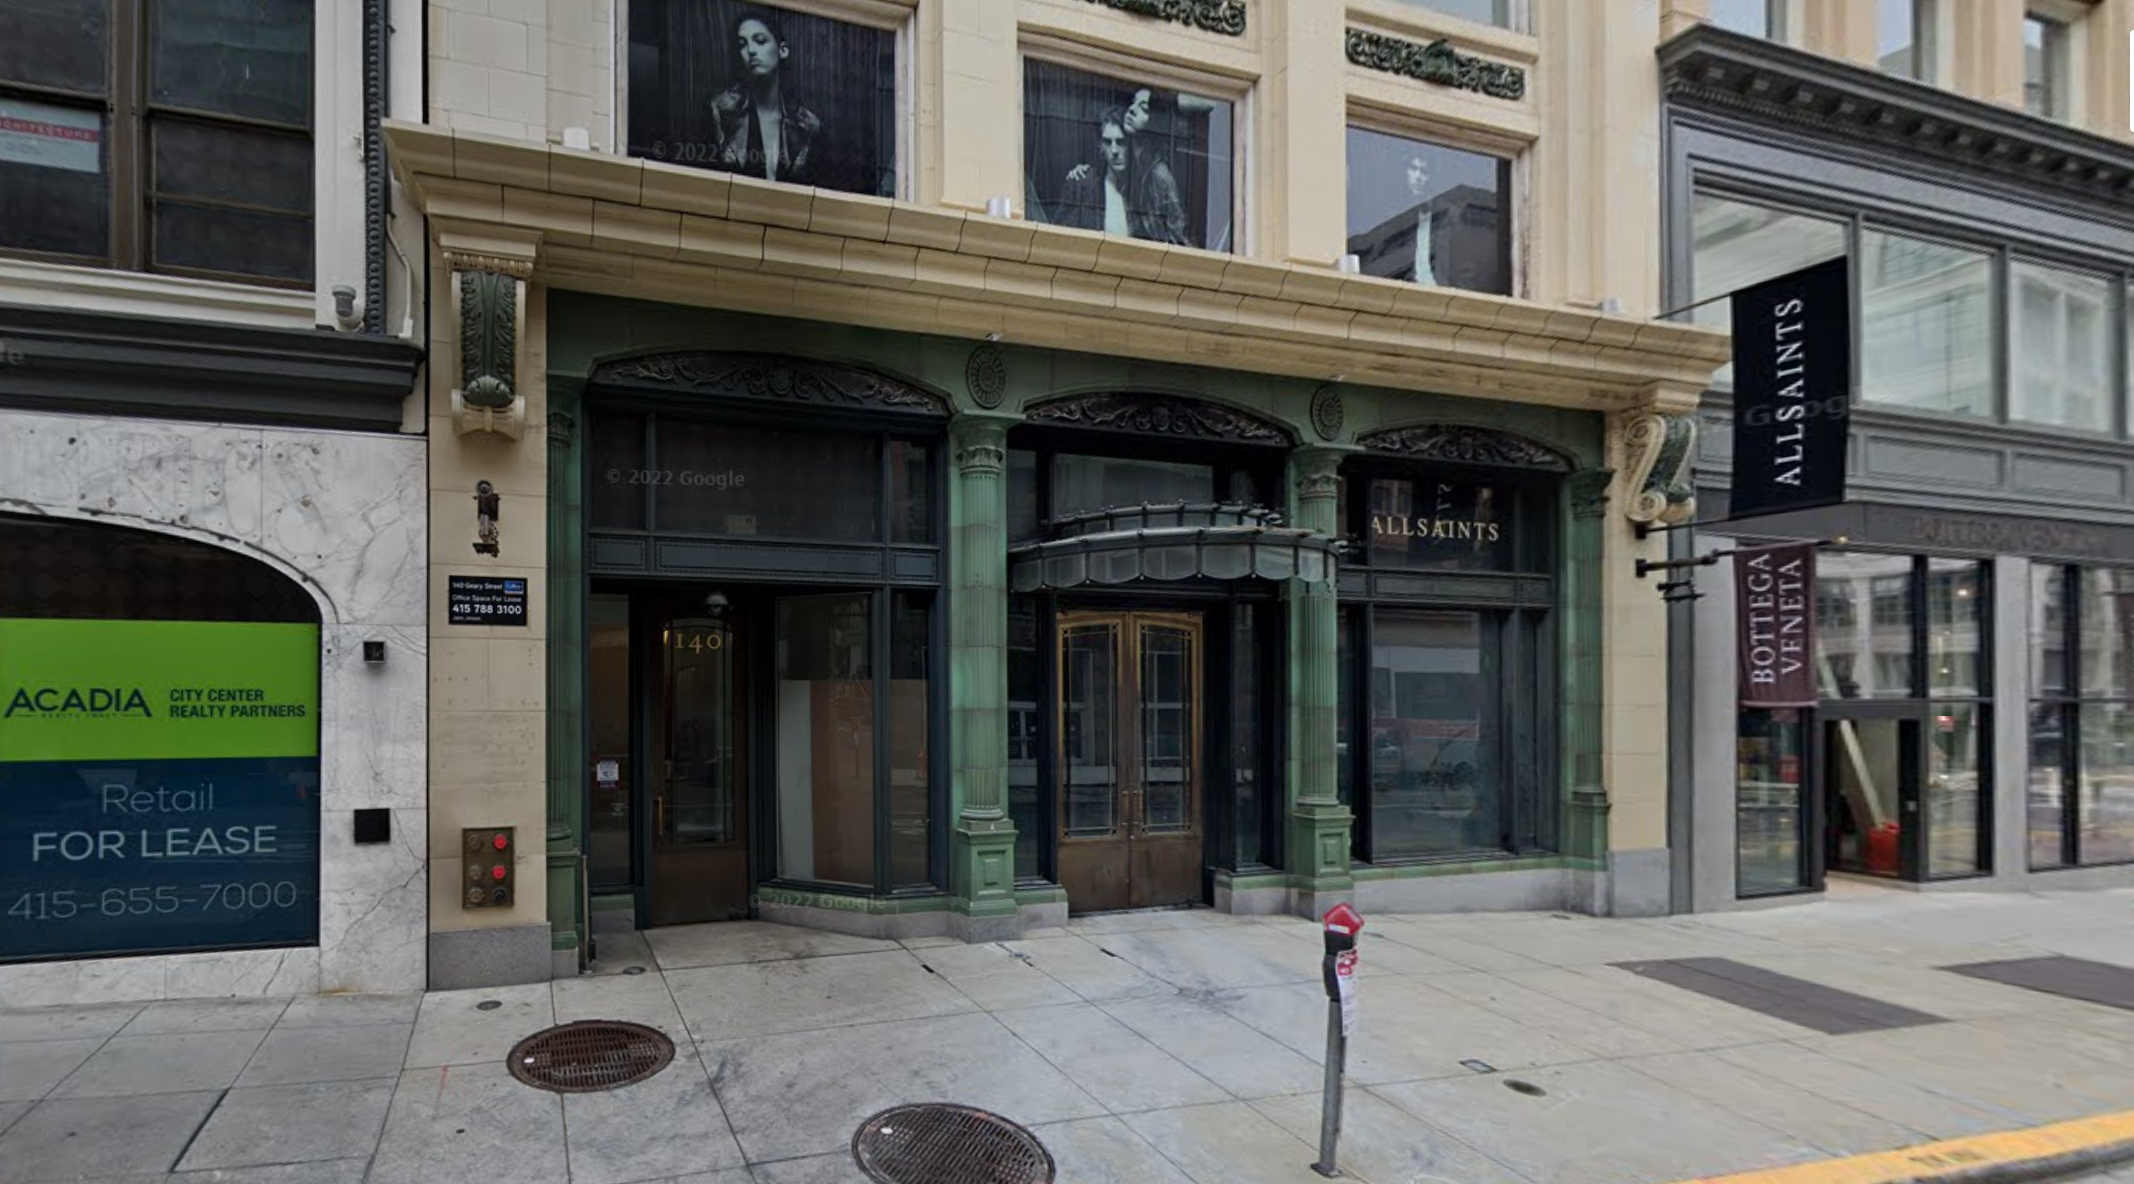 Chanel, Van Cleef & Arpels grab new retail locations in SF's Union